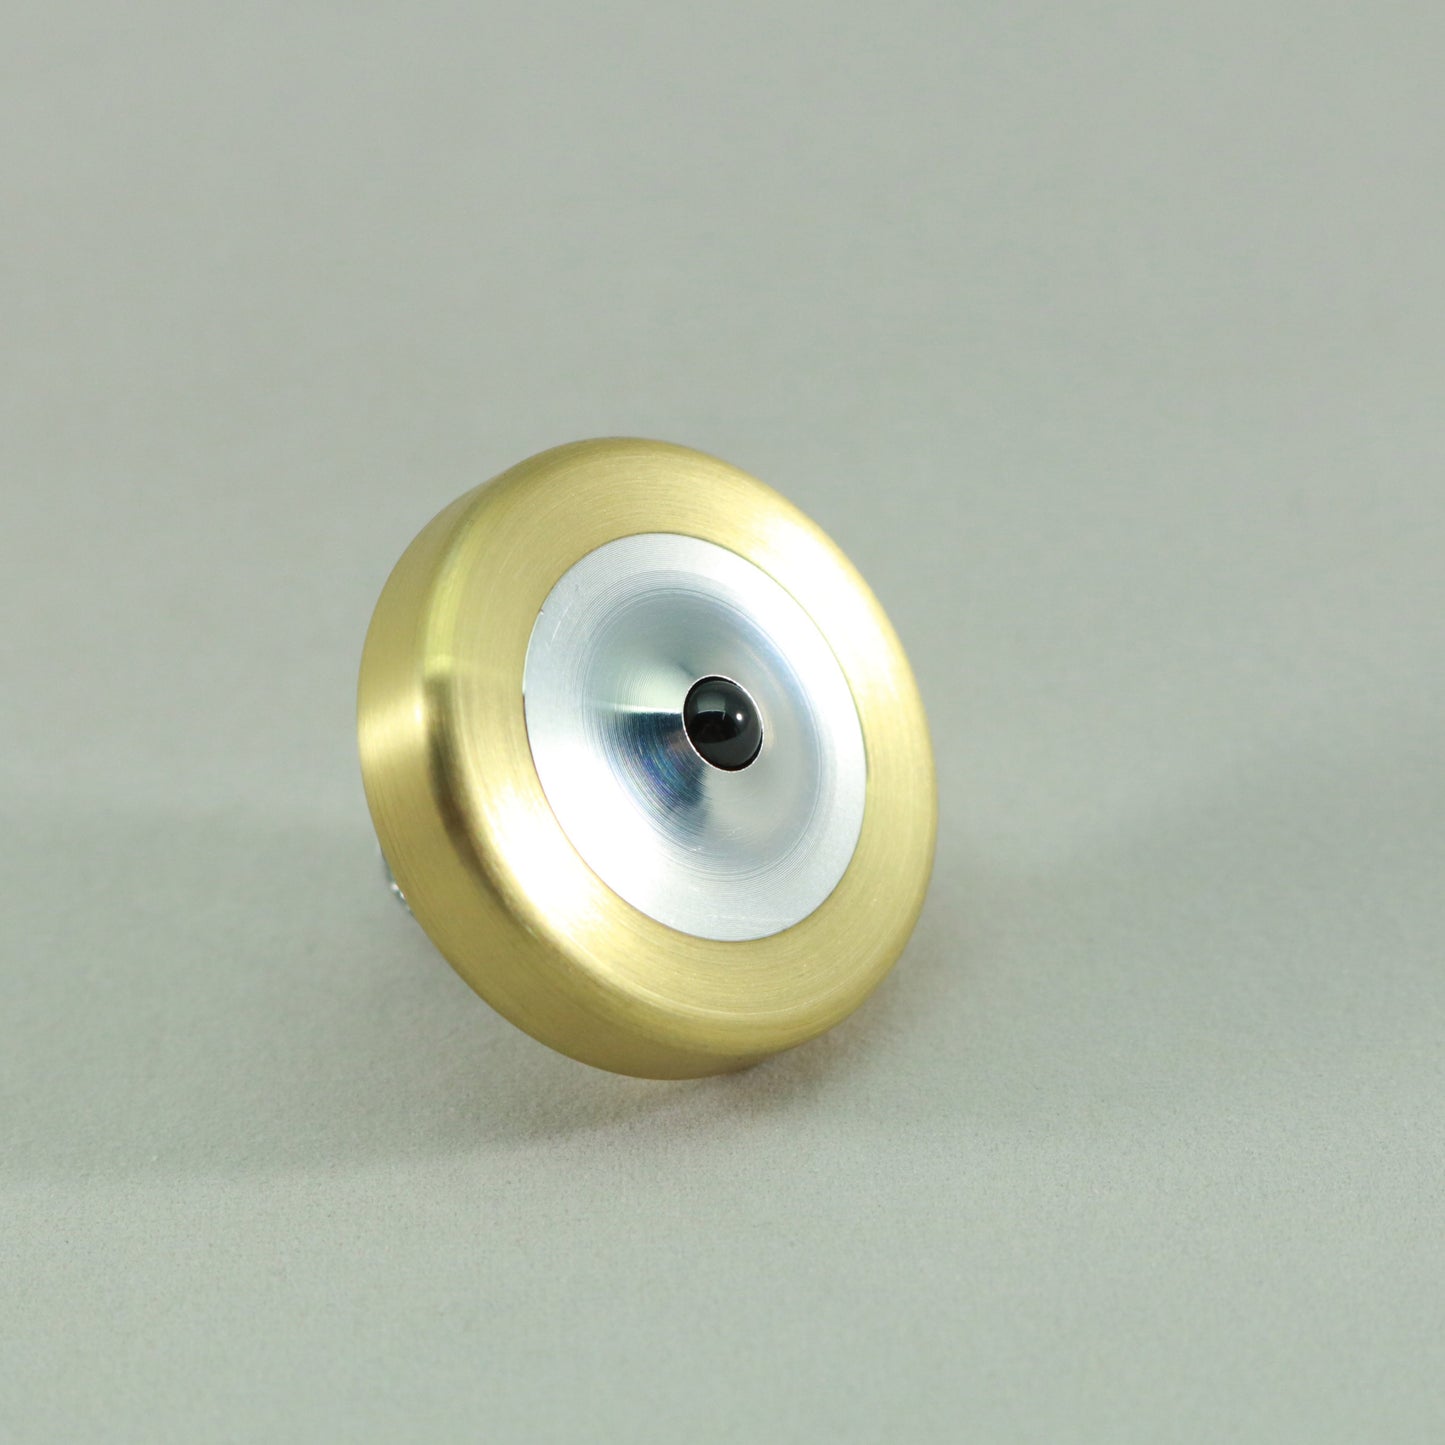 Dynamo - Brass and Aluminum Spinning Top w/ Super Grip Spindle